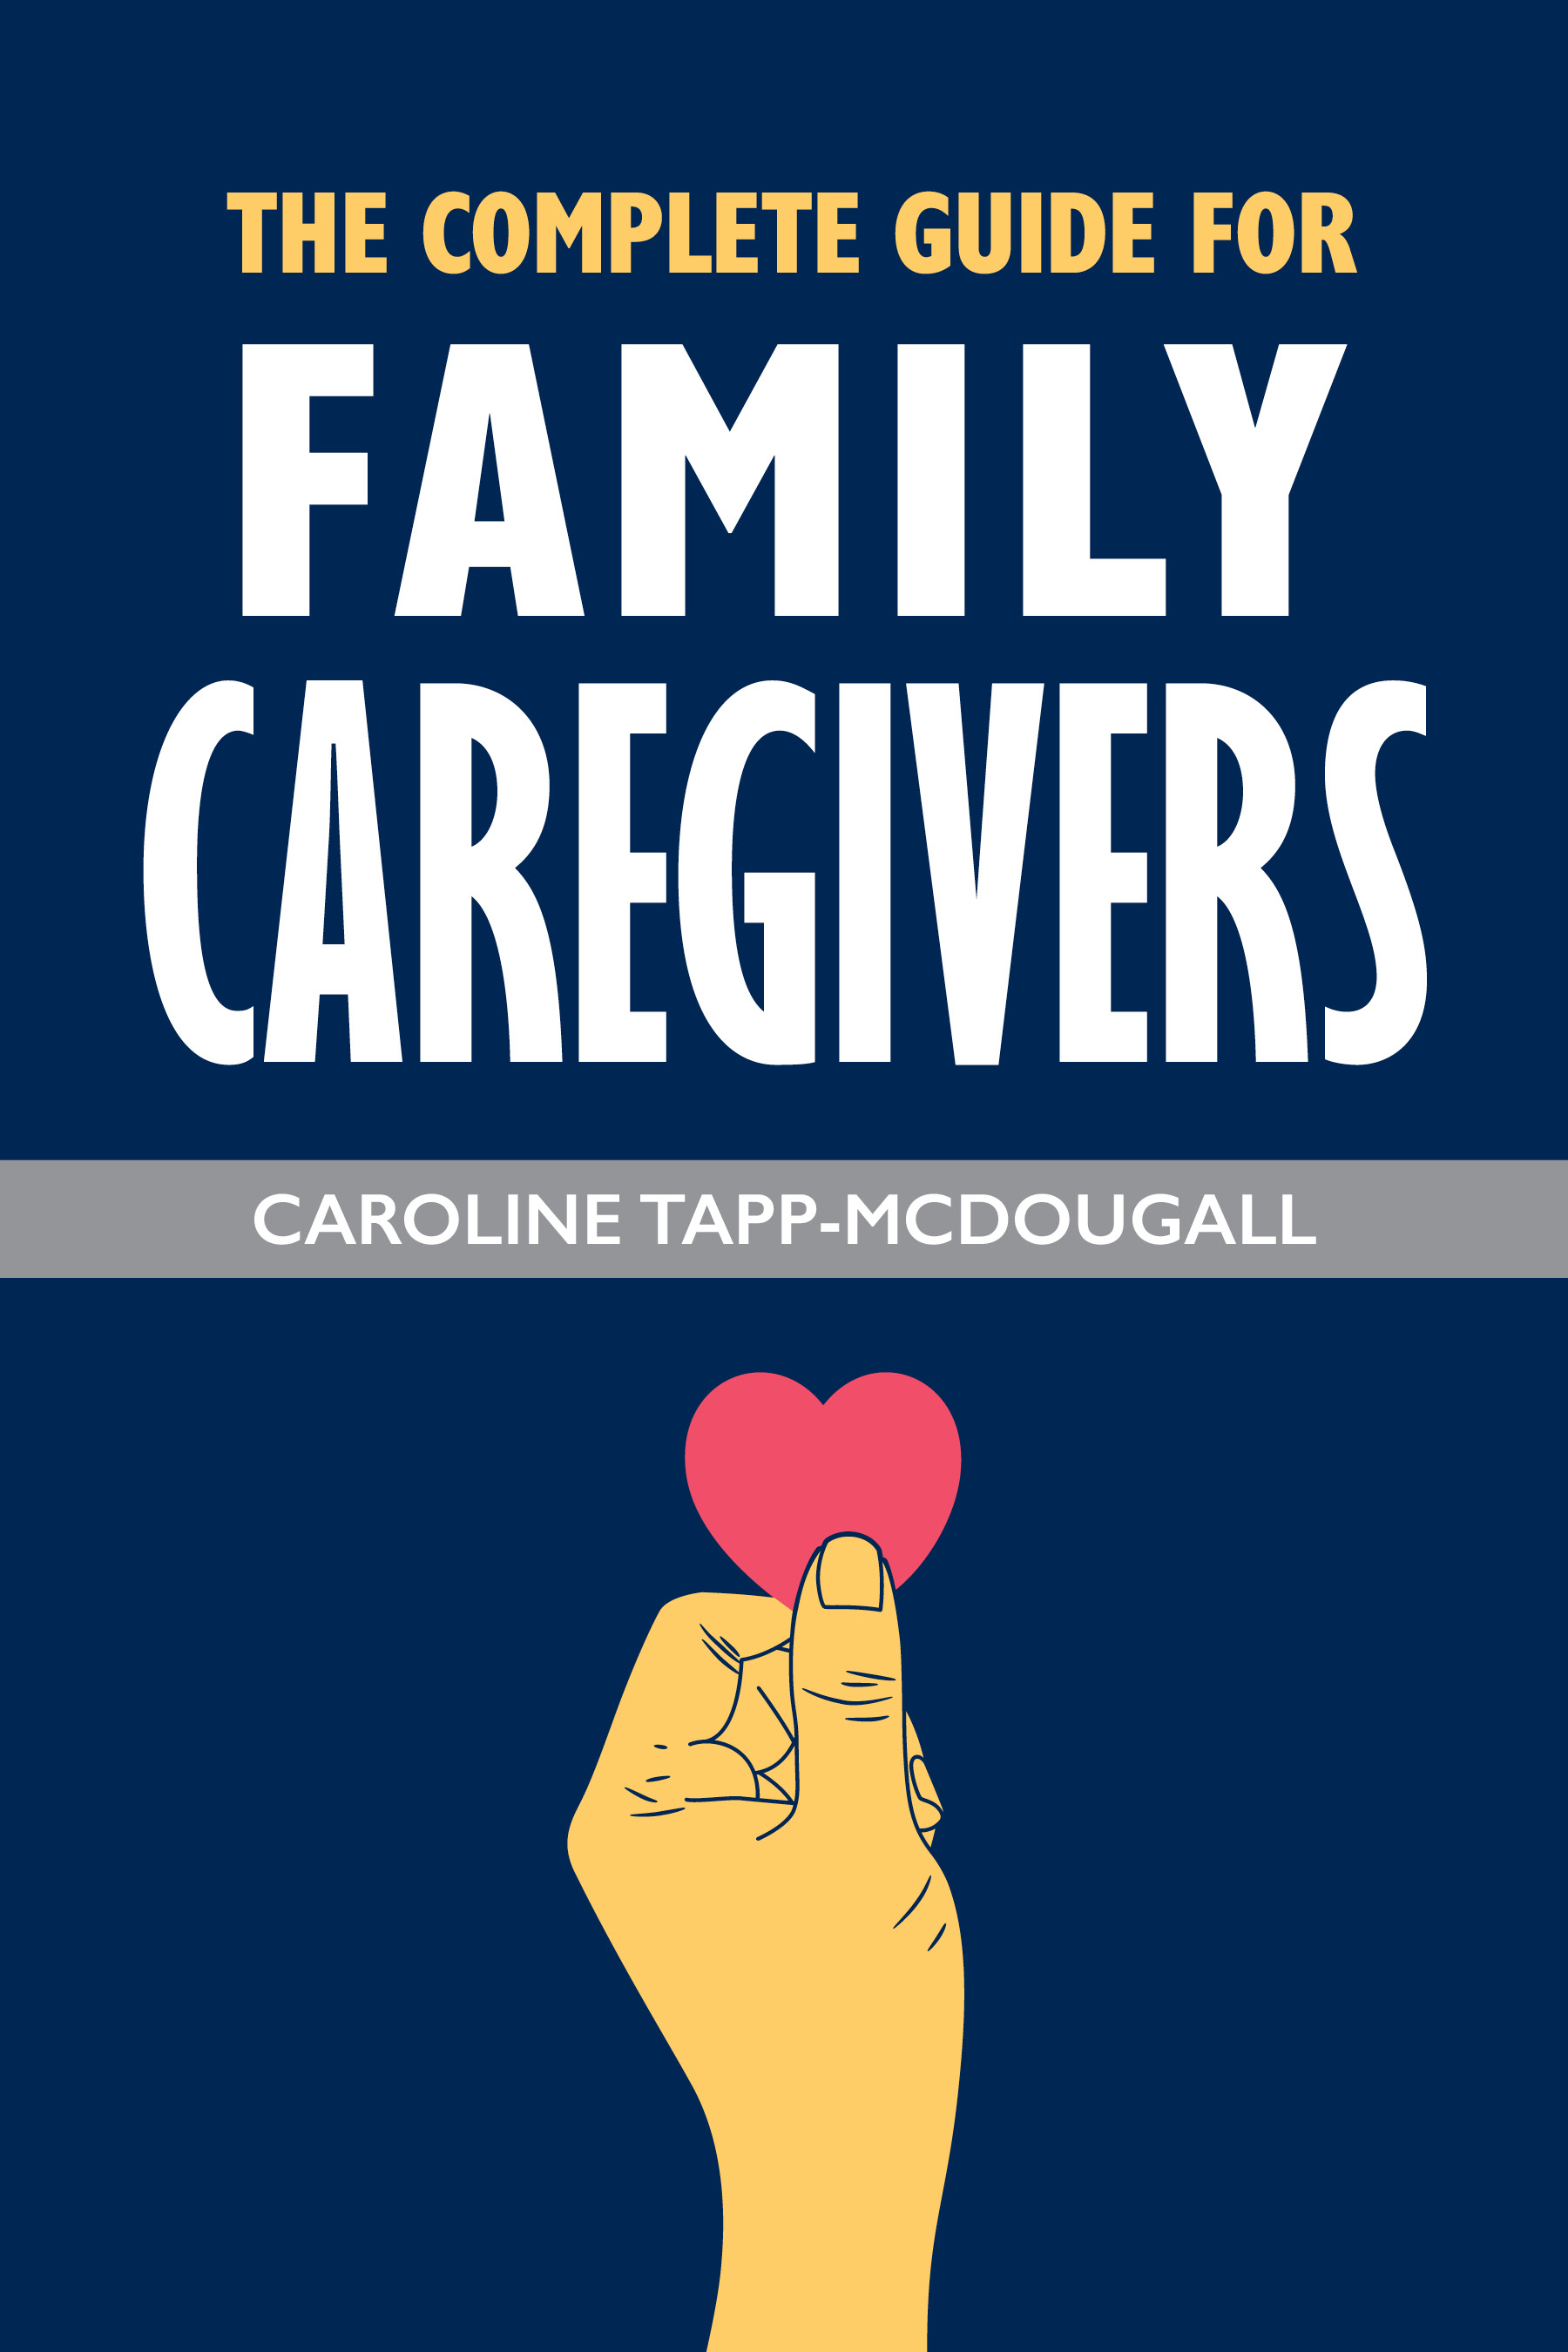 the cover of the complete guide for family caregivers - picture of a hand holding a heart